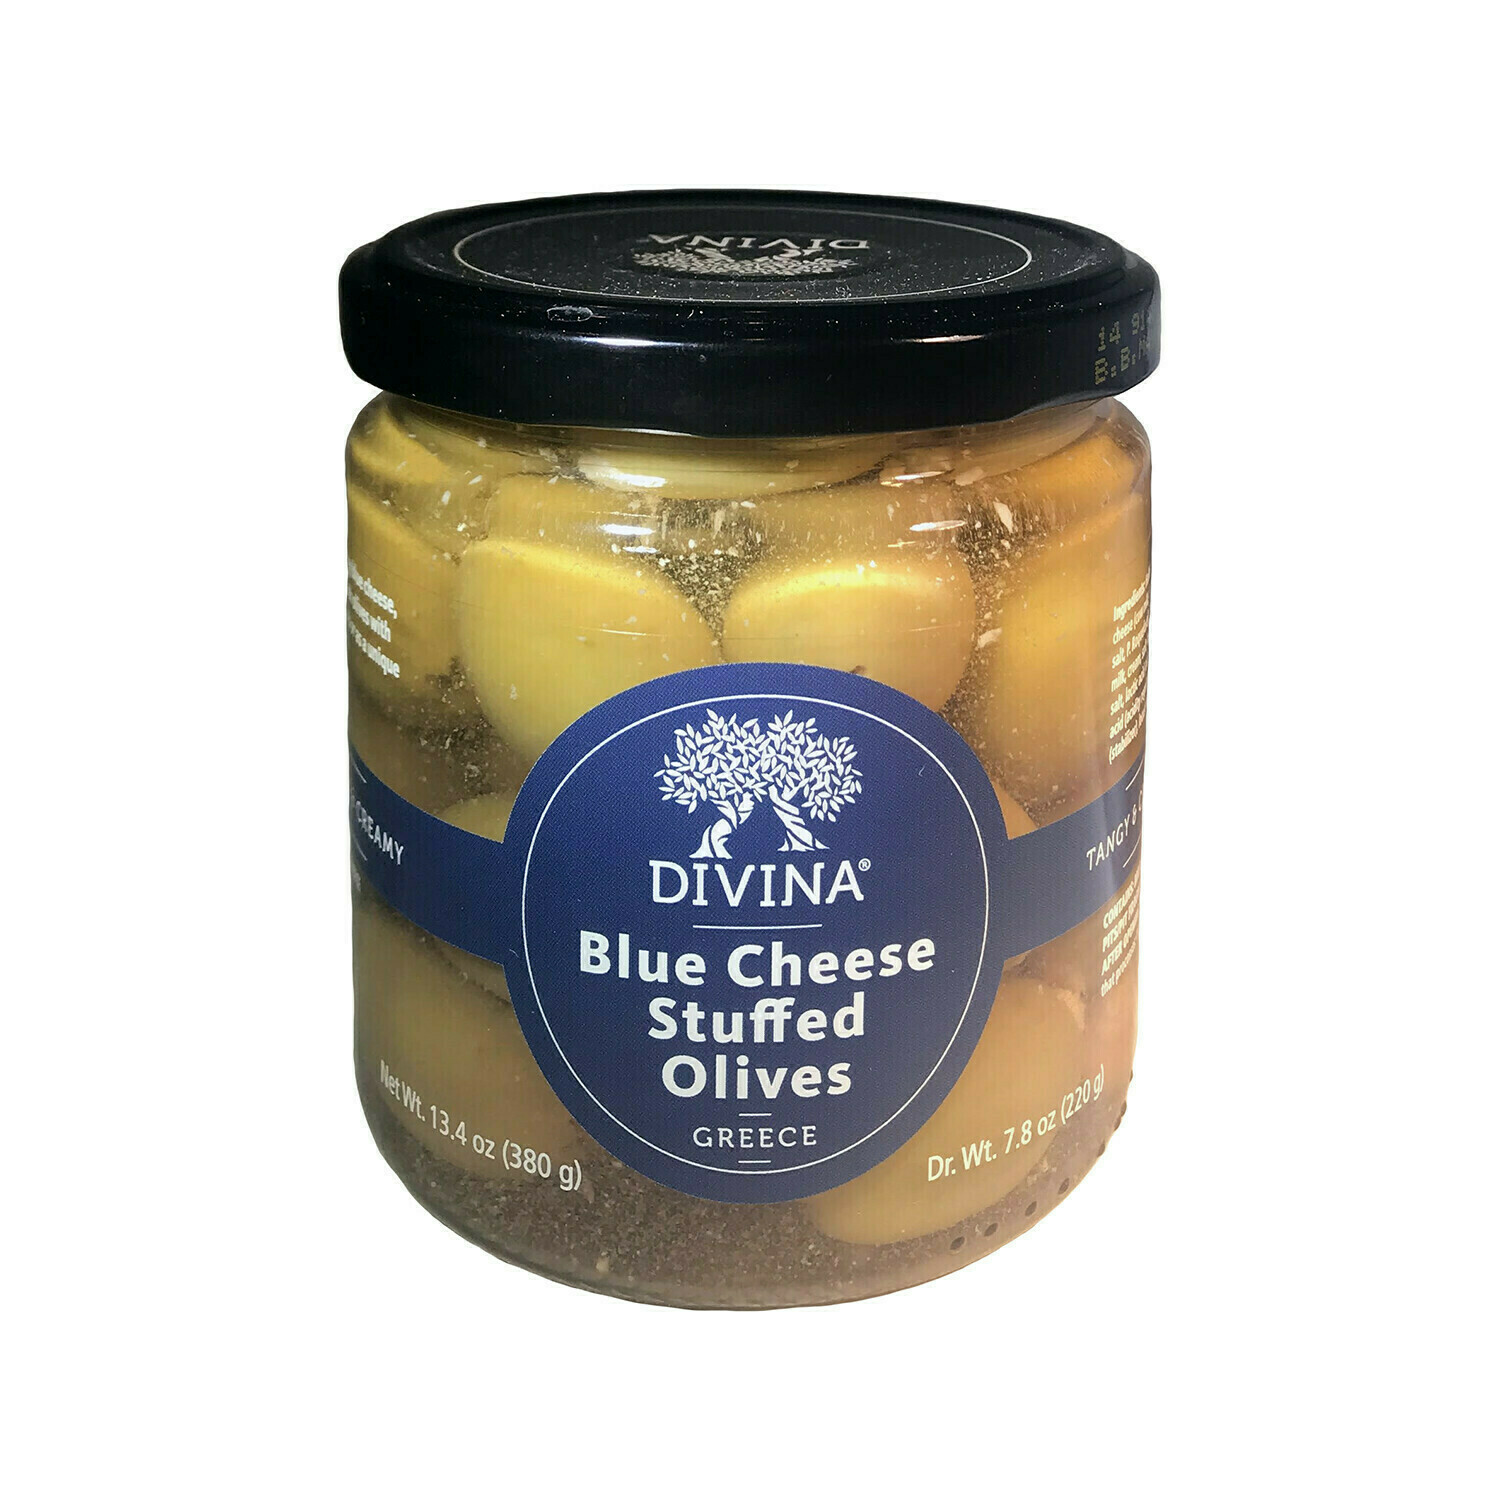 Blue Cheese Stuffed Olives Greece 13.4oz